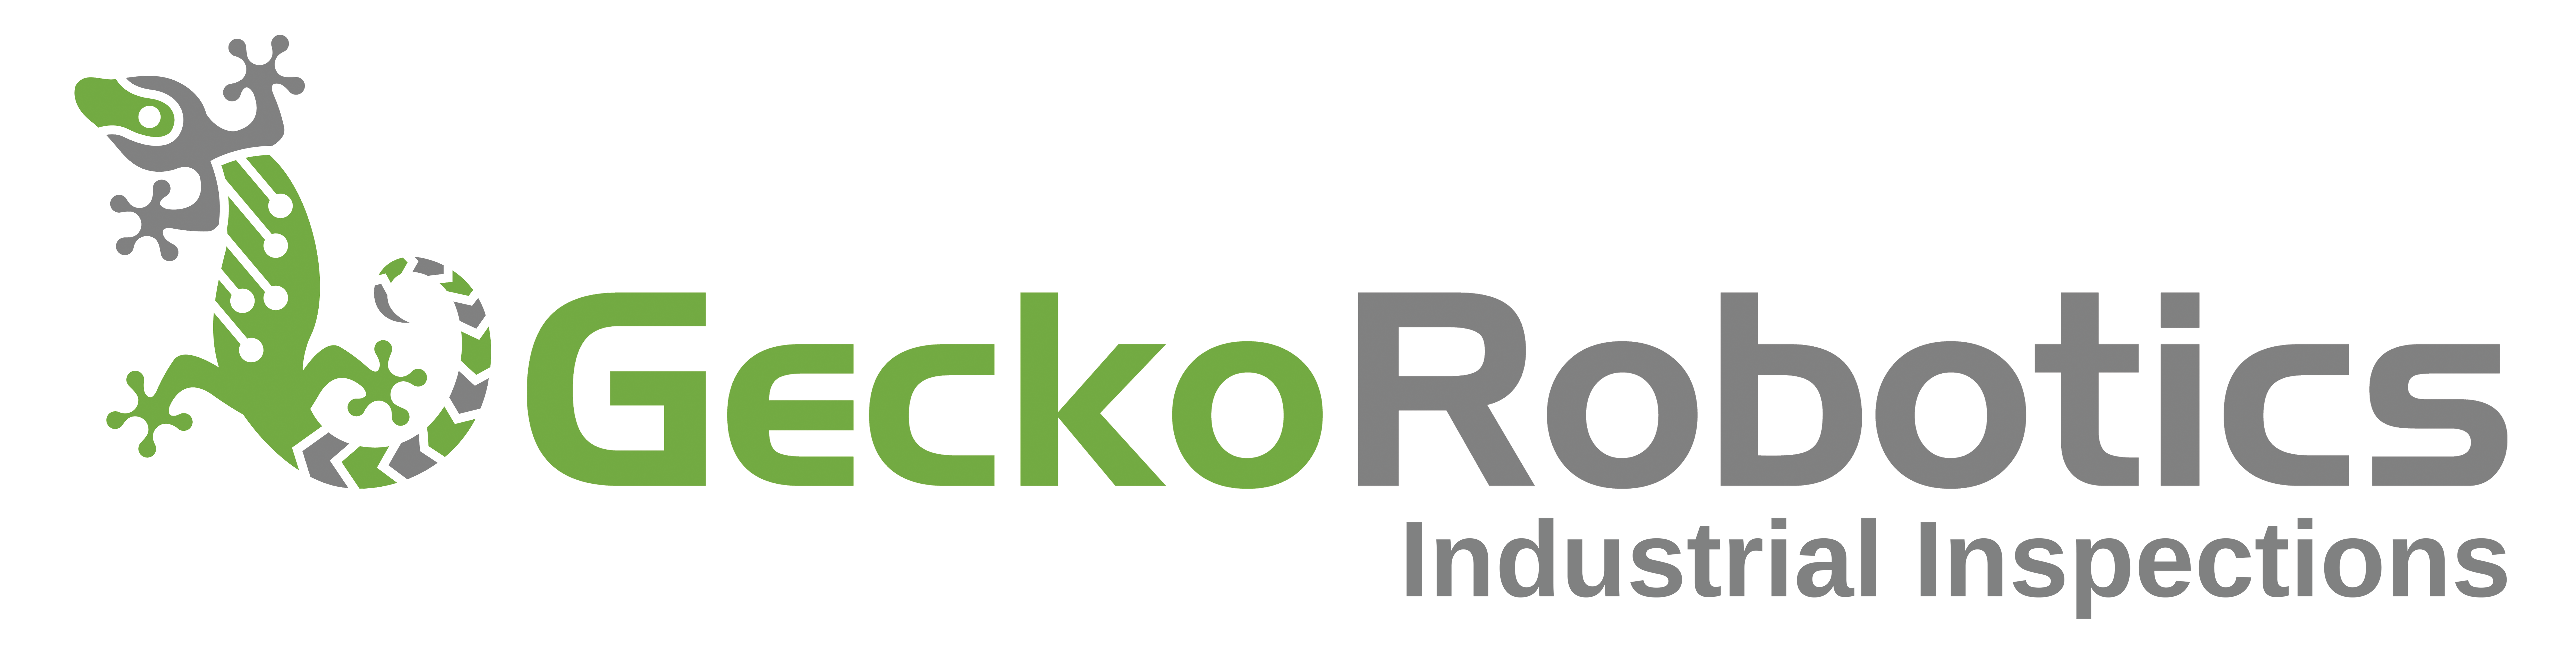 Gecko Logo - Gecko Robotics | Industrial Inspections in Pittsburgh, PA